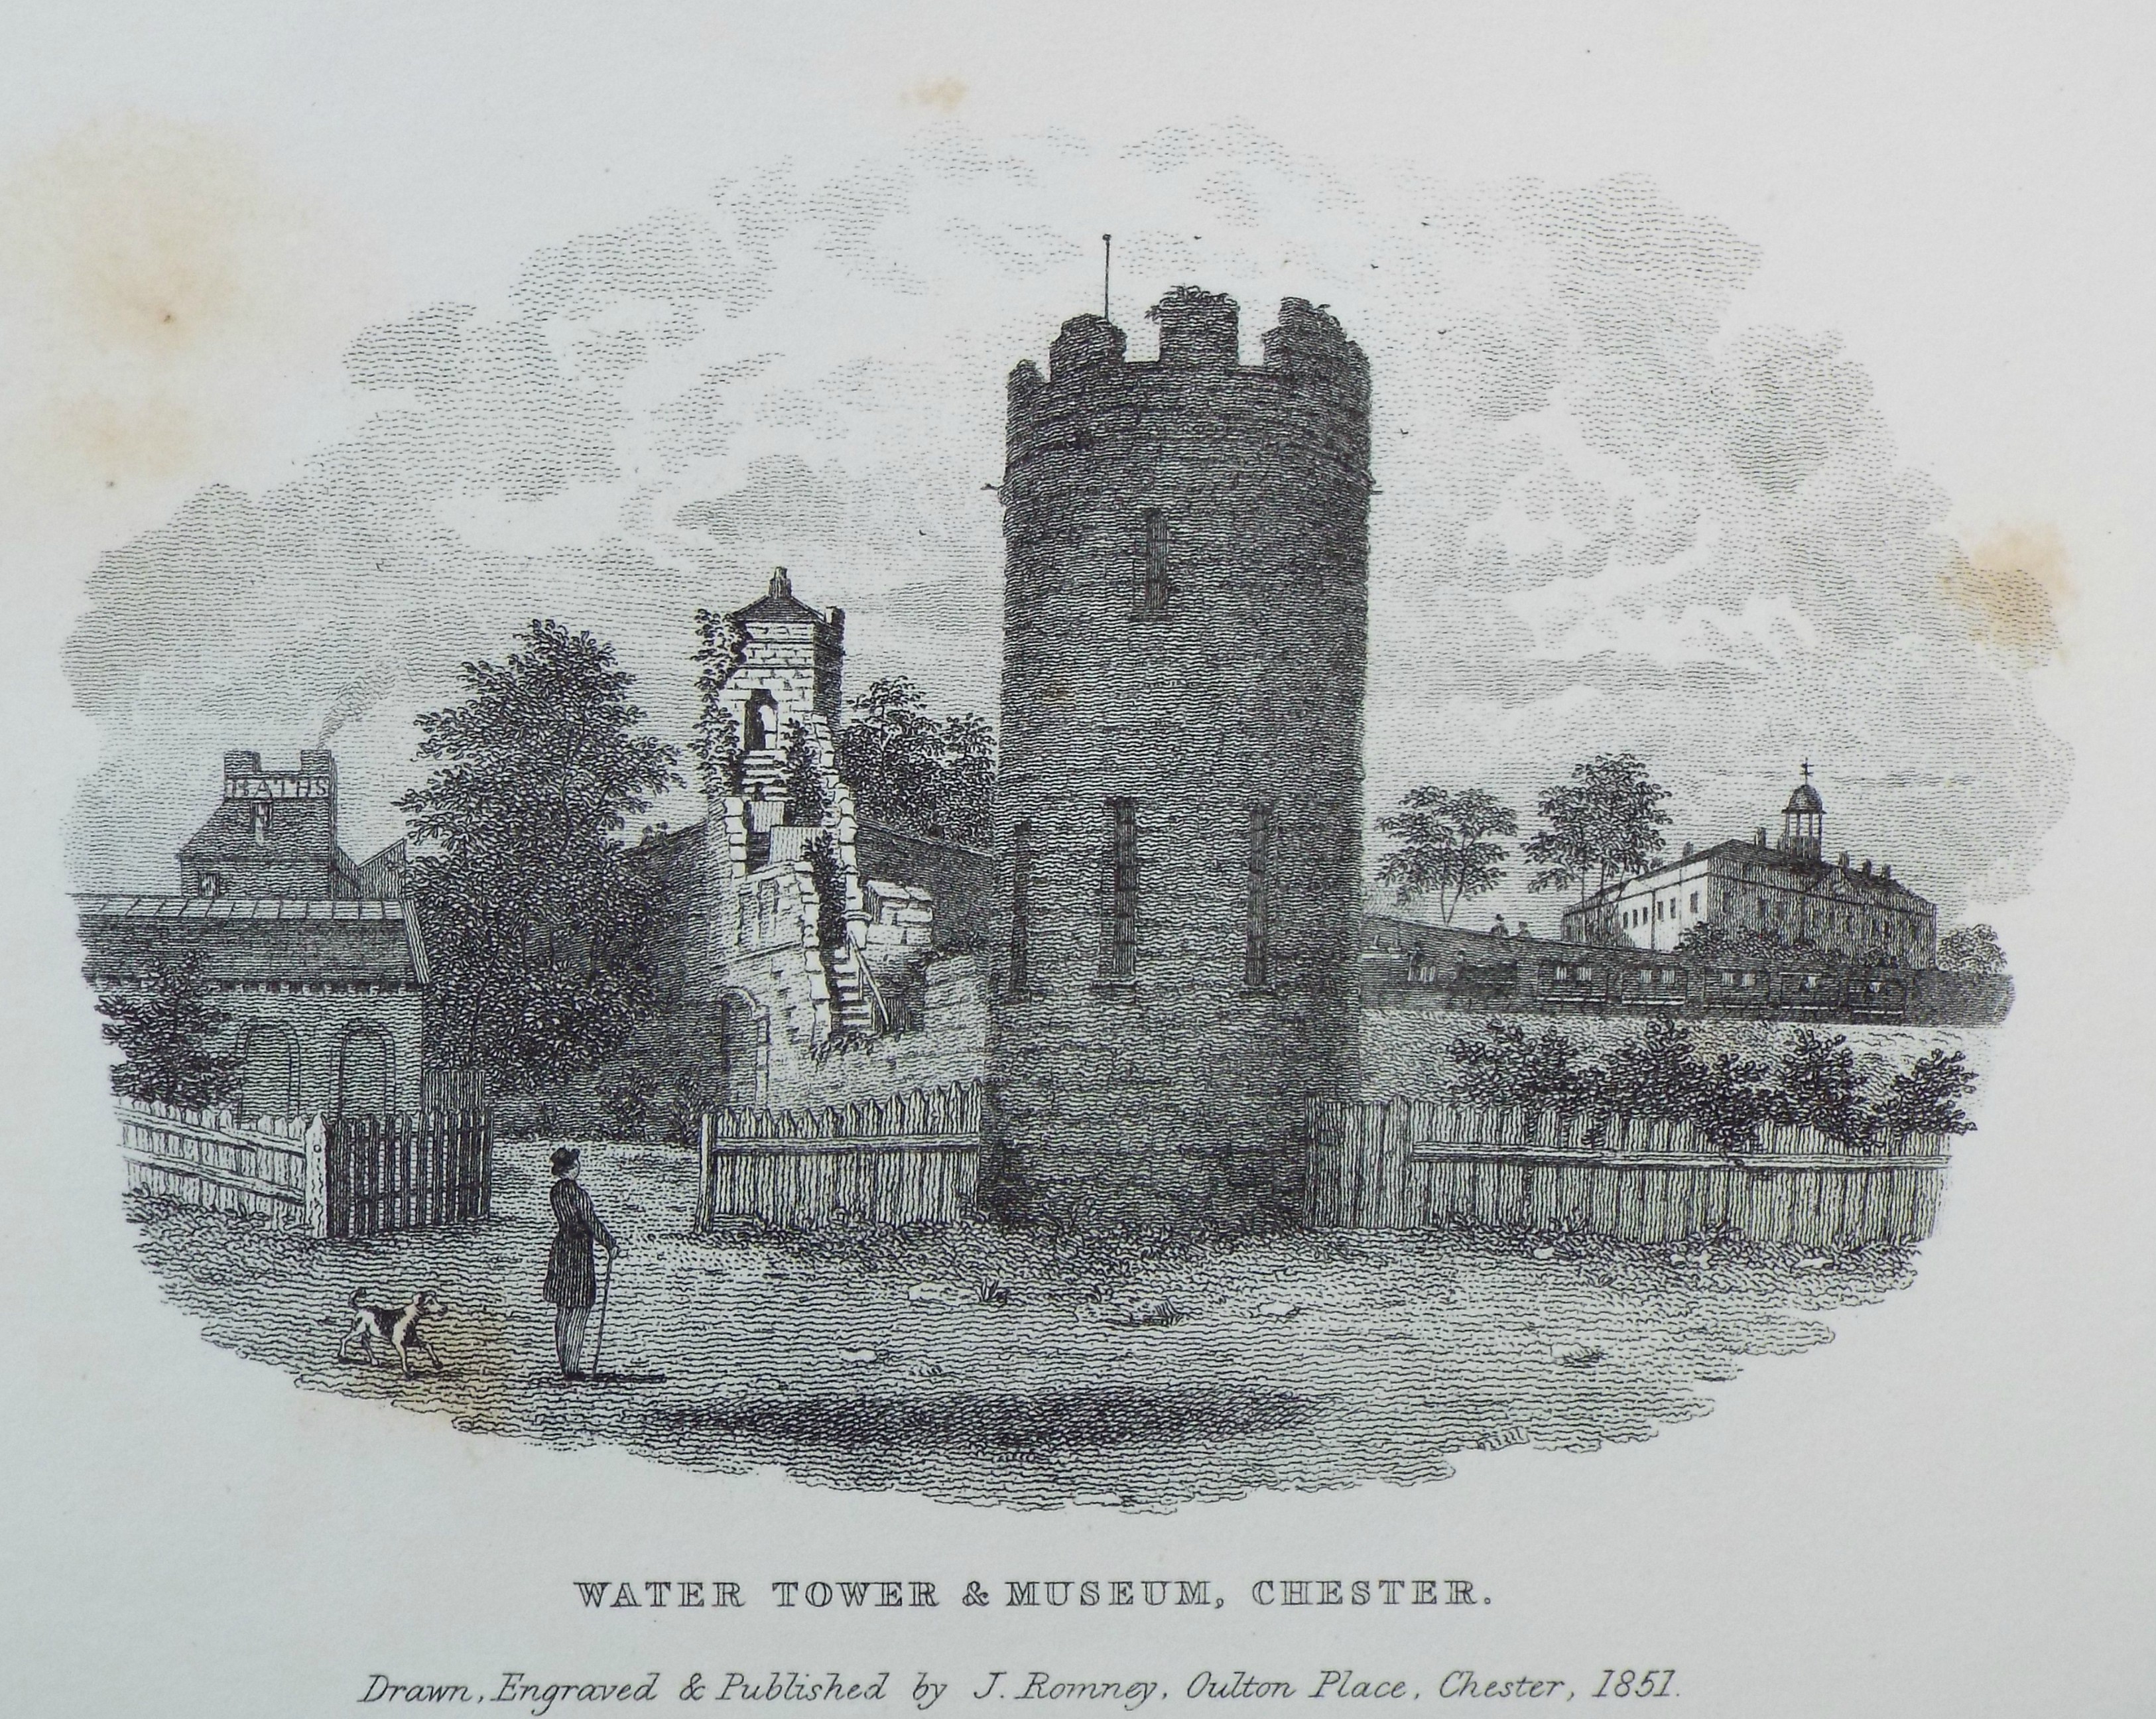 Print - Water Tower & Museum, Chester. - Romney